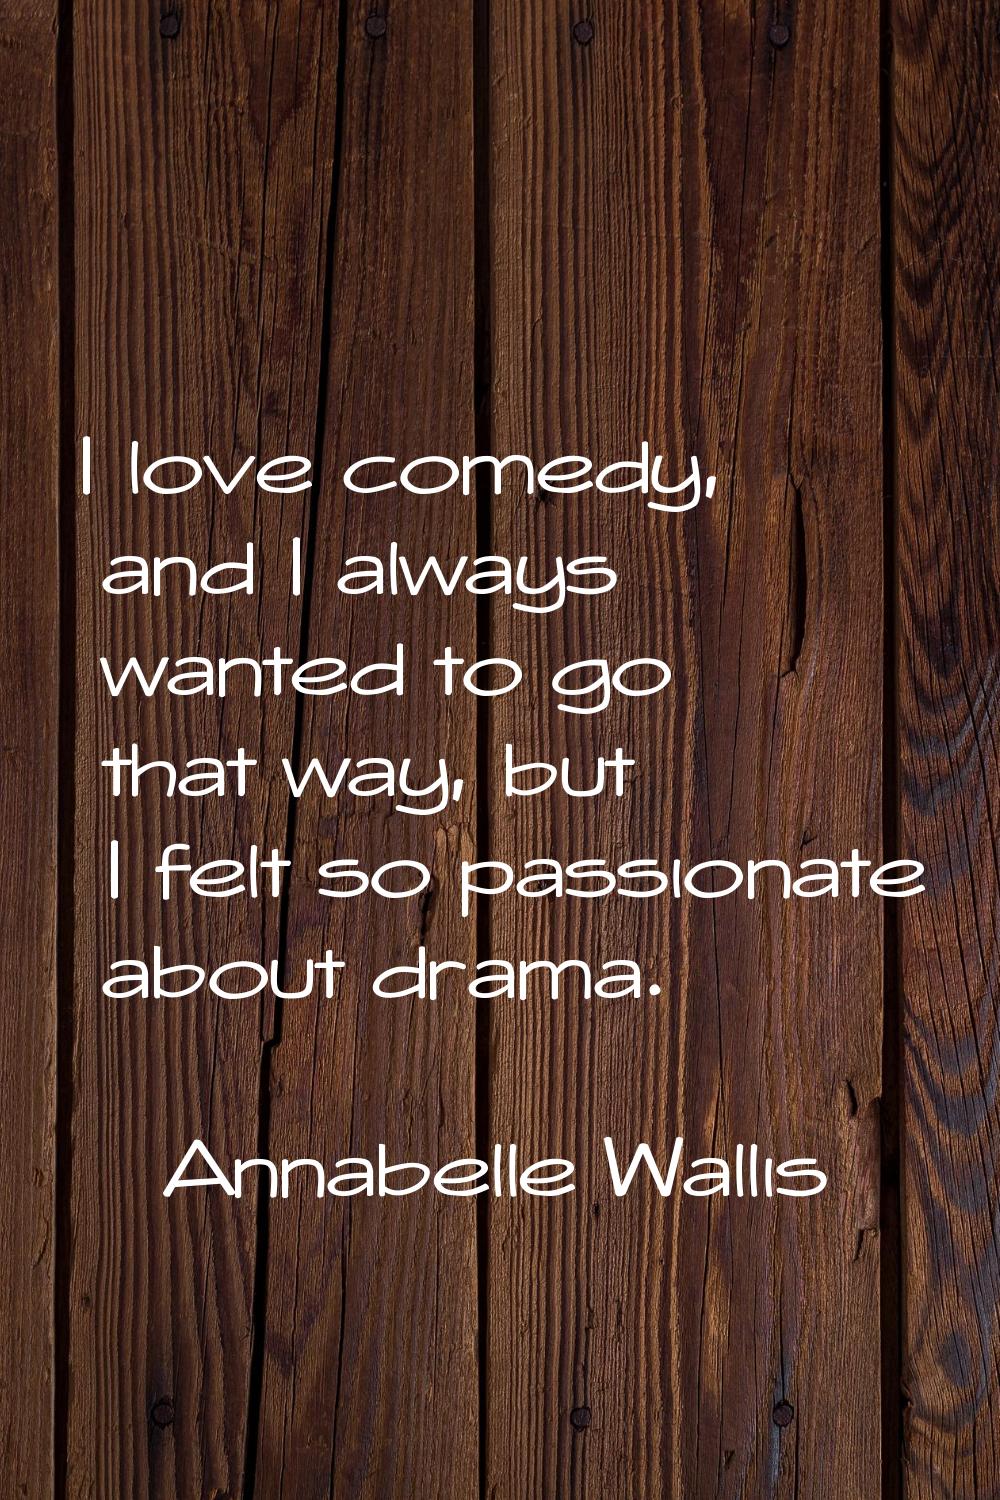 I love comedy, and I always wanted to go that way, but I felt so passionate about drama.